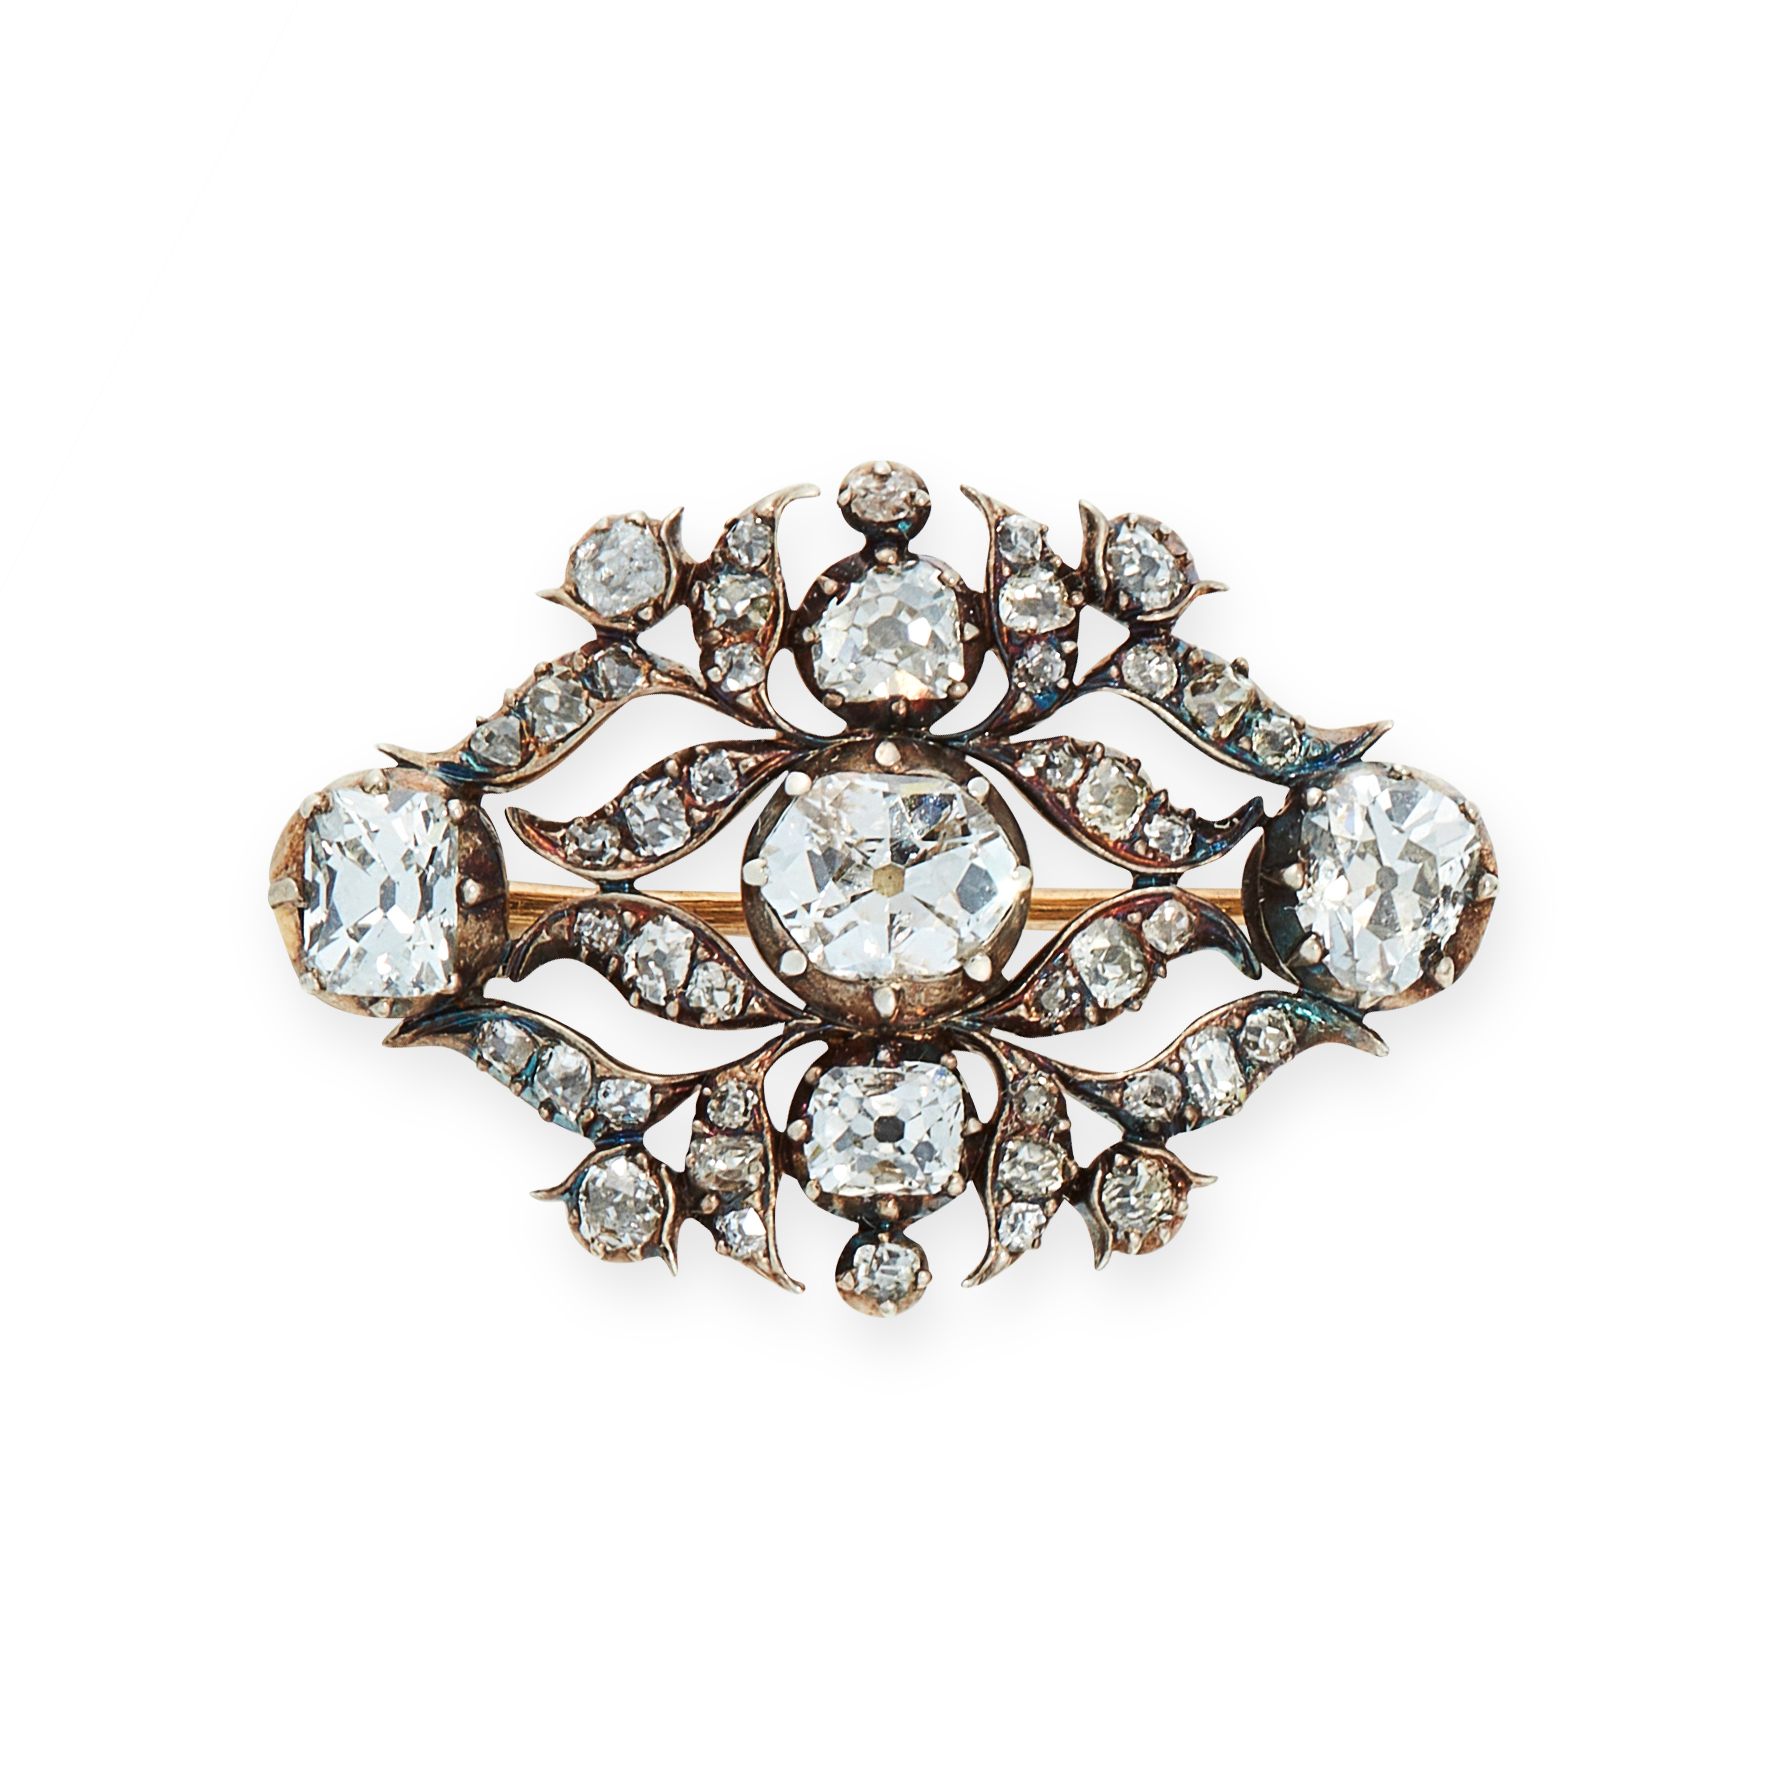 AN ANTIQUE DIAMOND BROOCH, EARLY 19TH CENTURY in yellow gold and silver, set with a principal